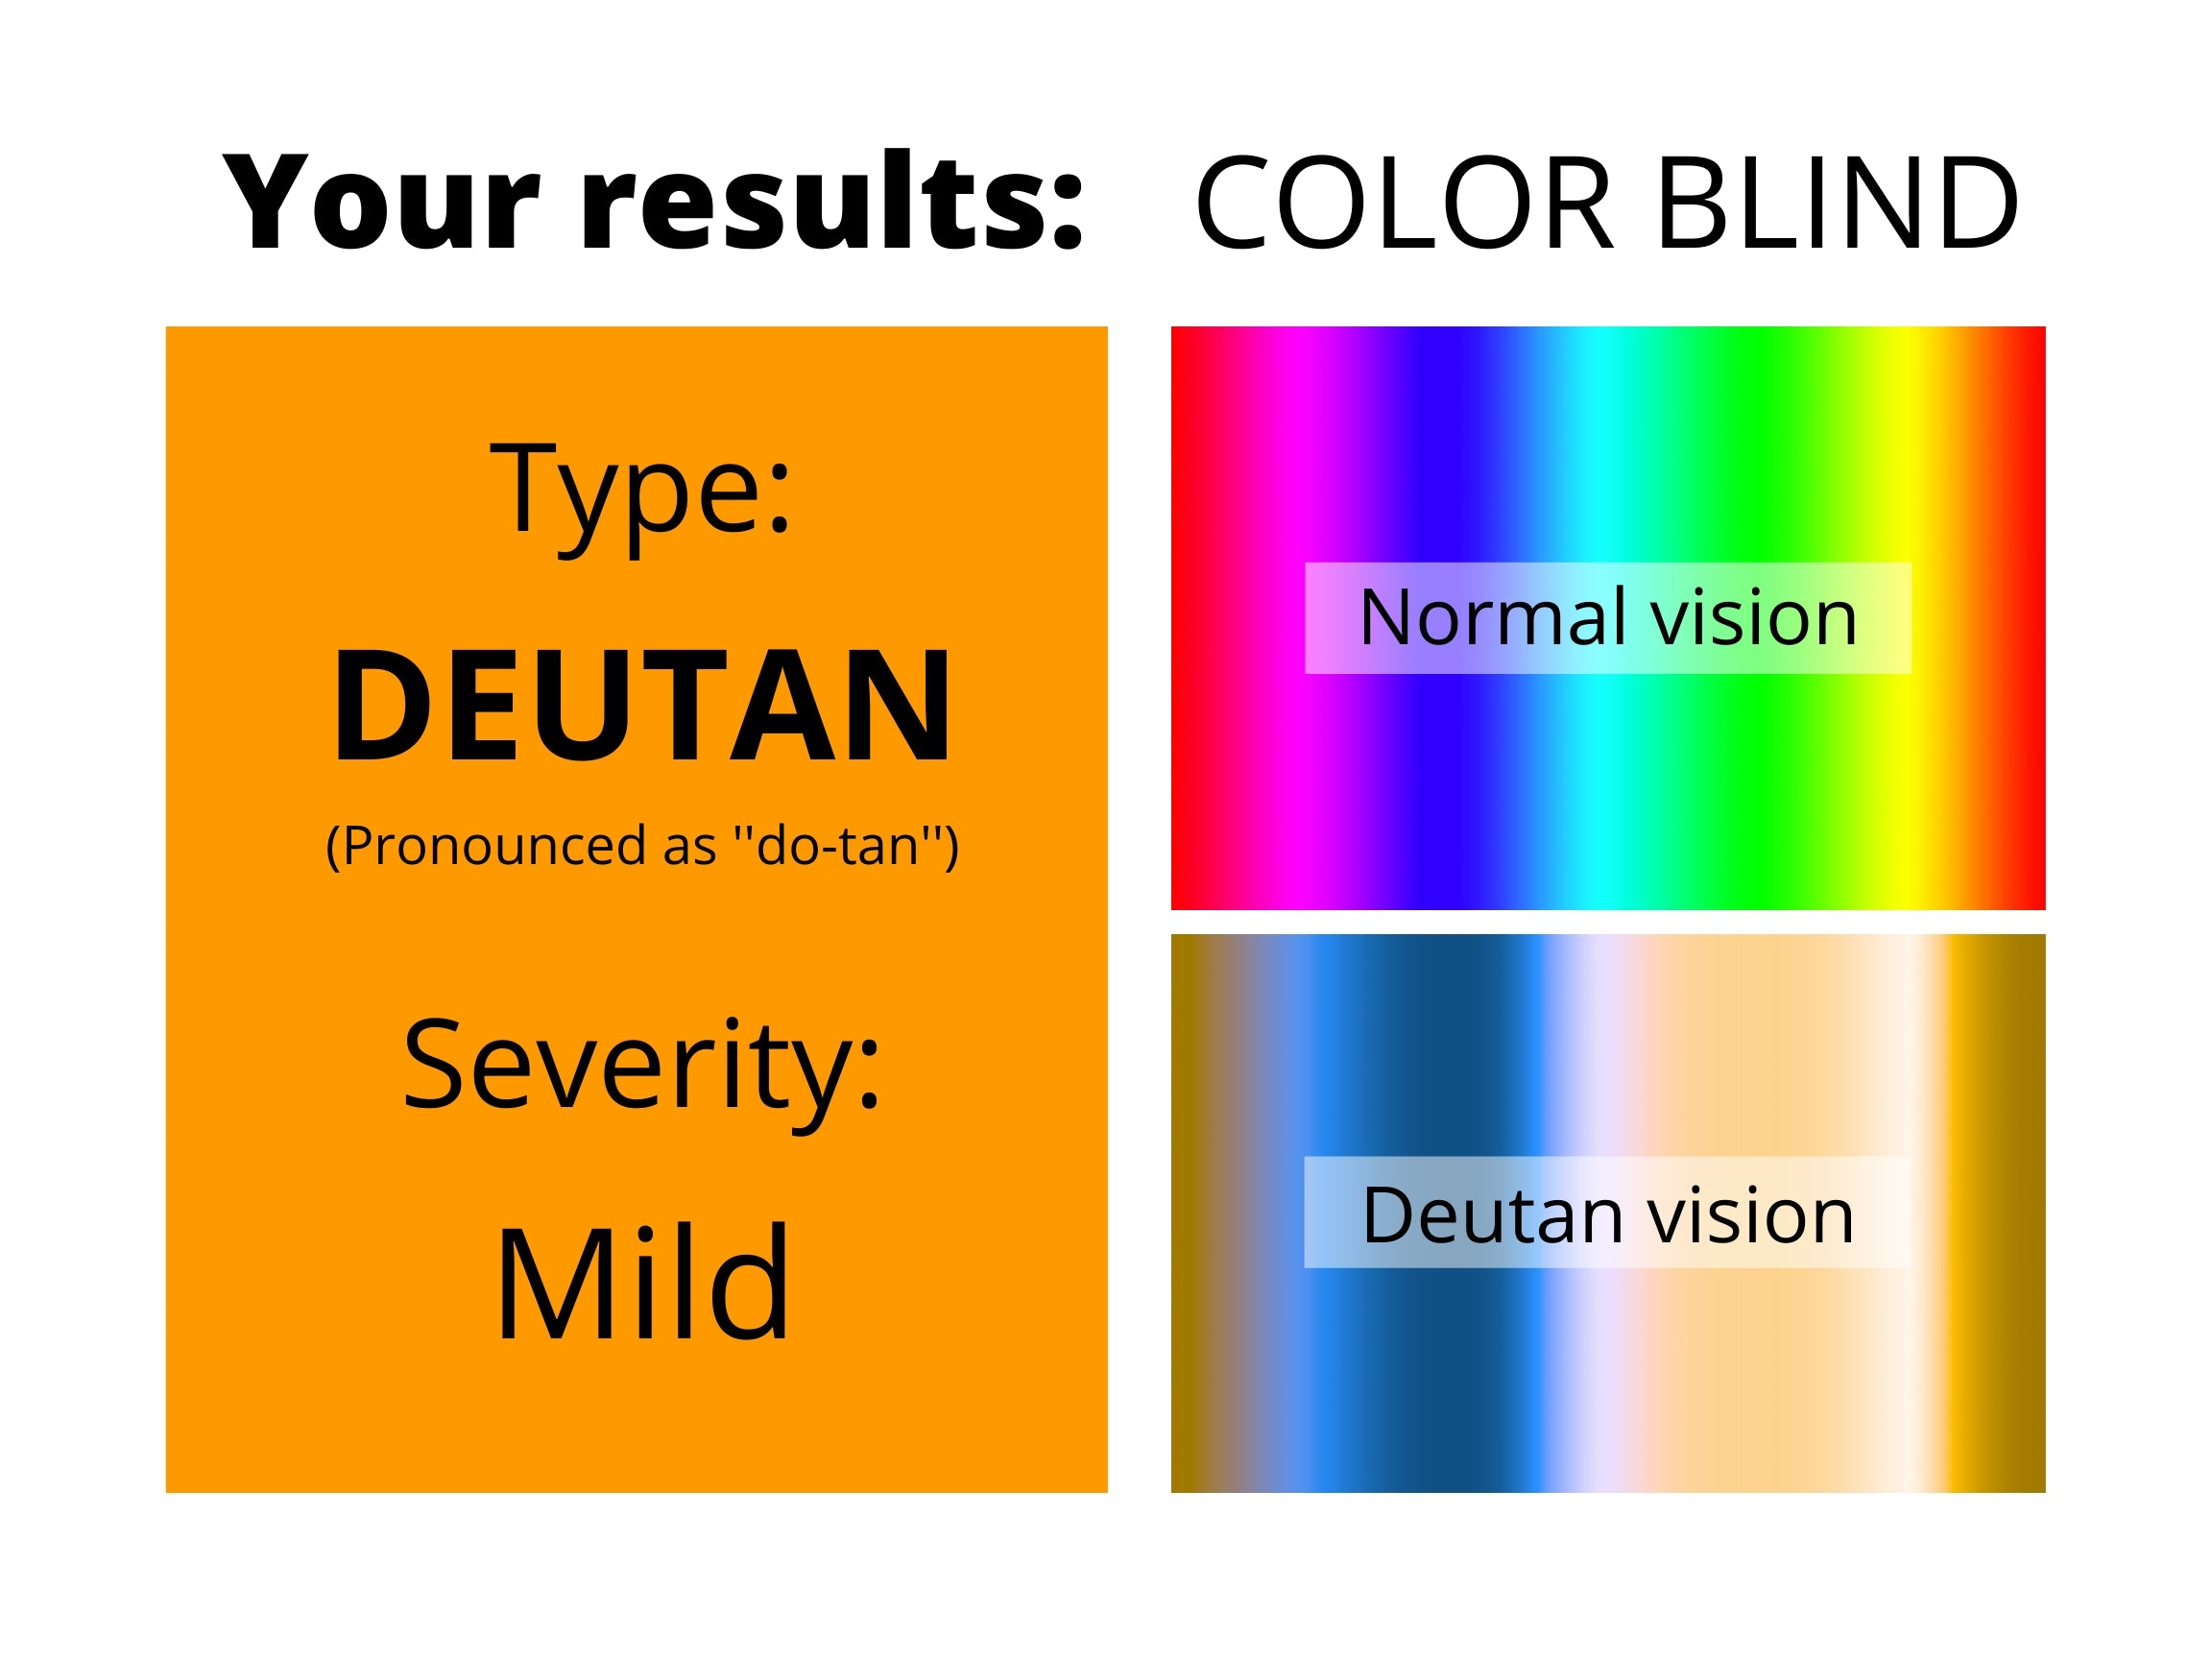 Is there mild color blindness?